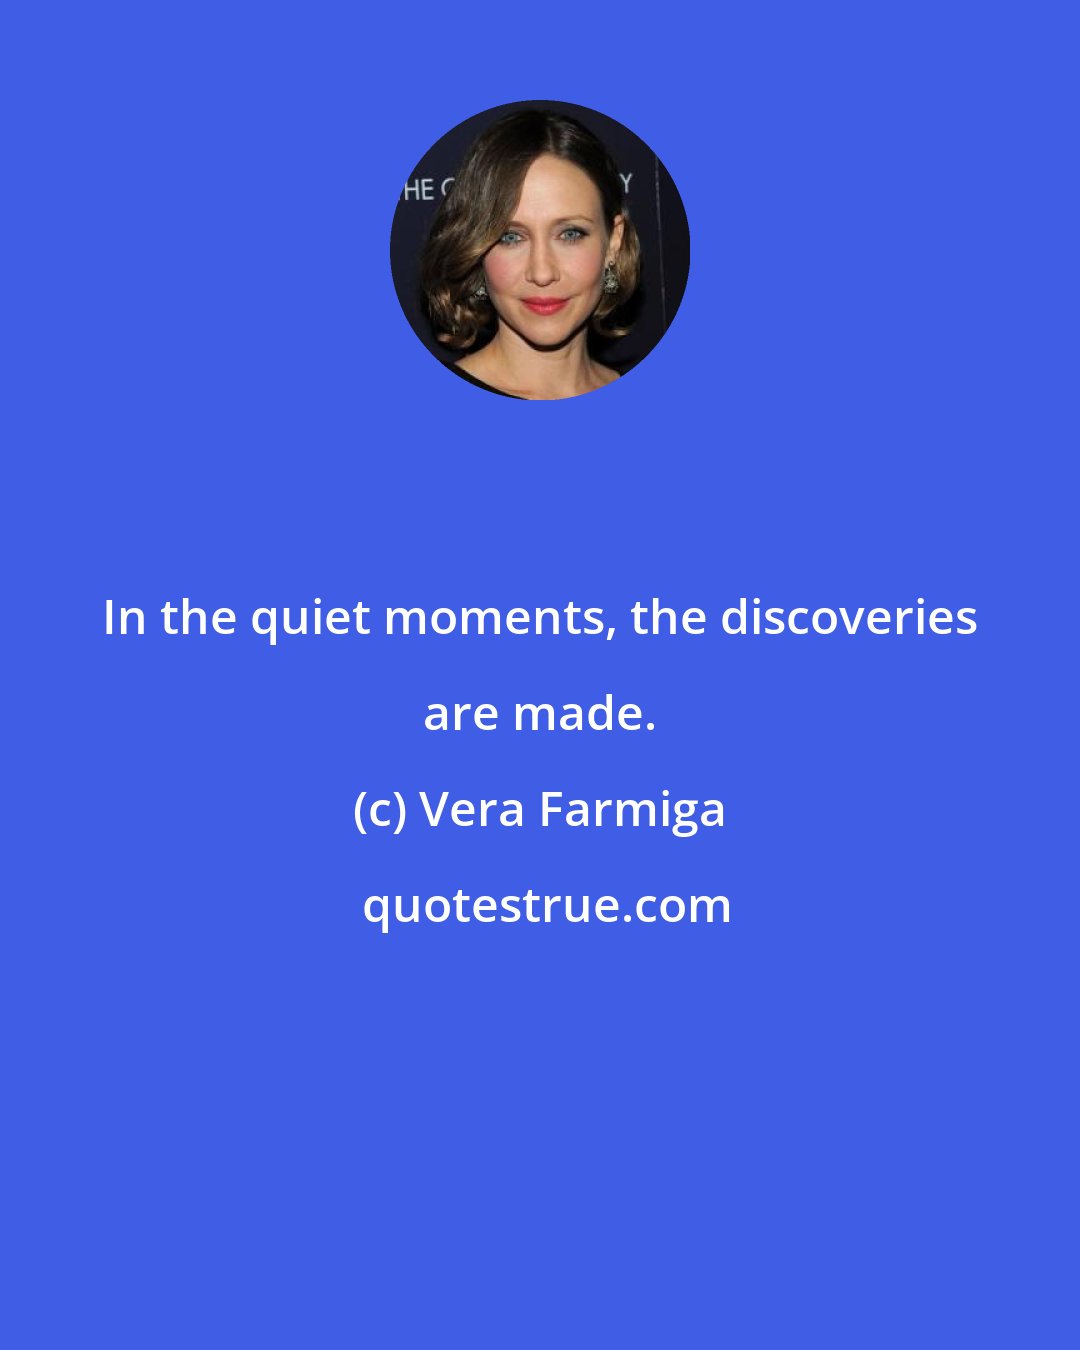 Vera Farmiga: In the quiet moments, the discoveries are made.